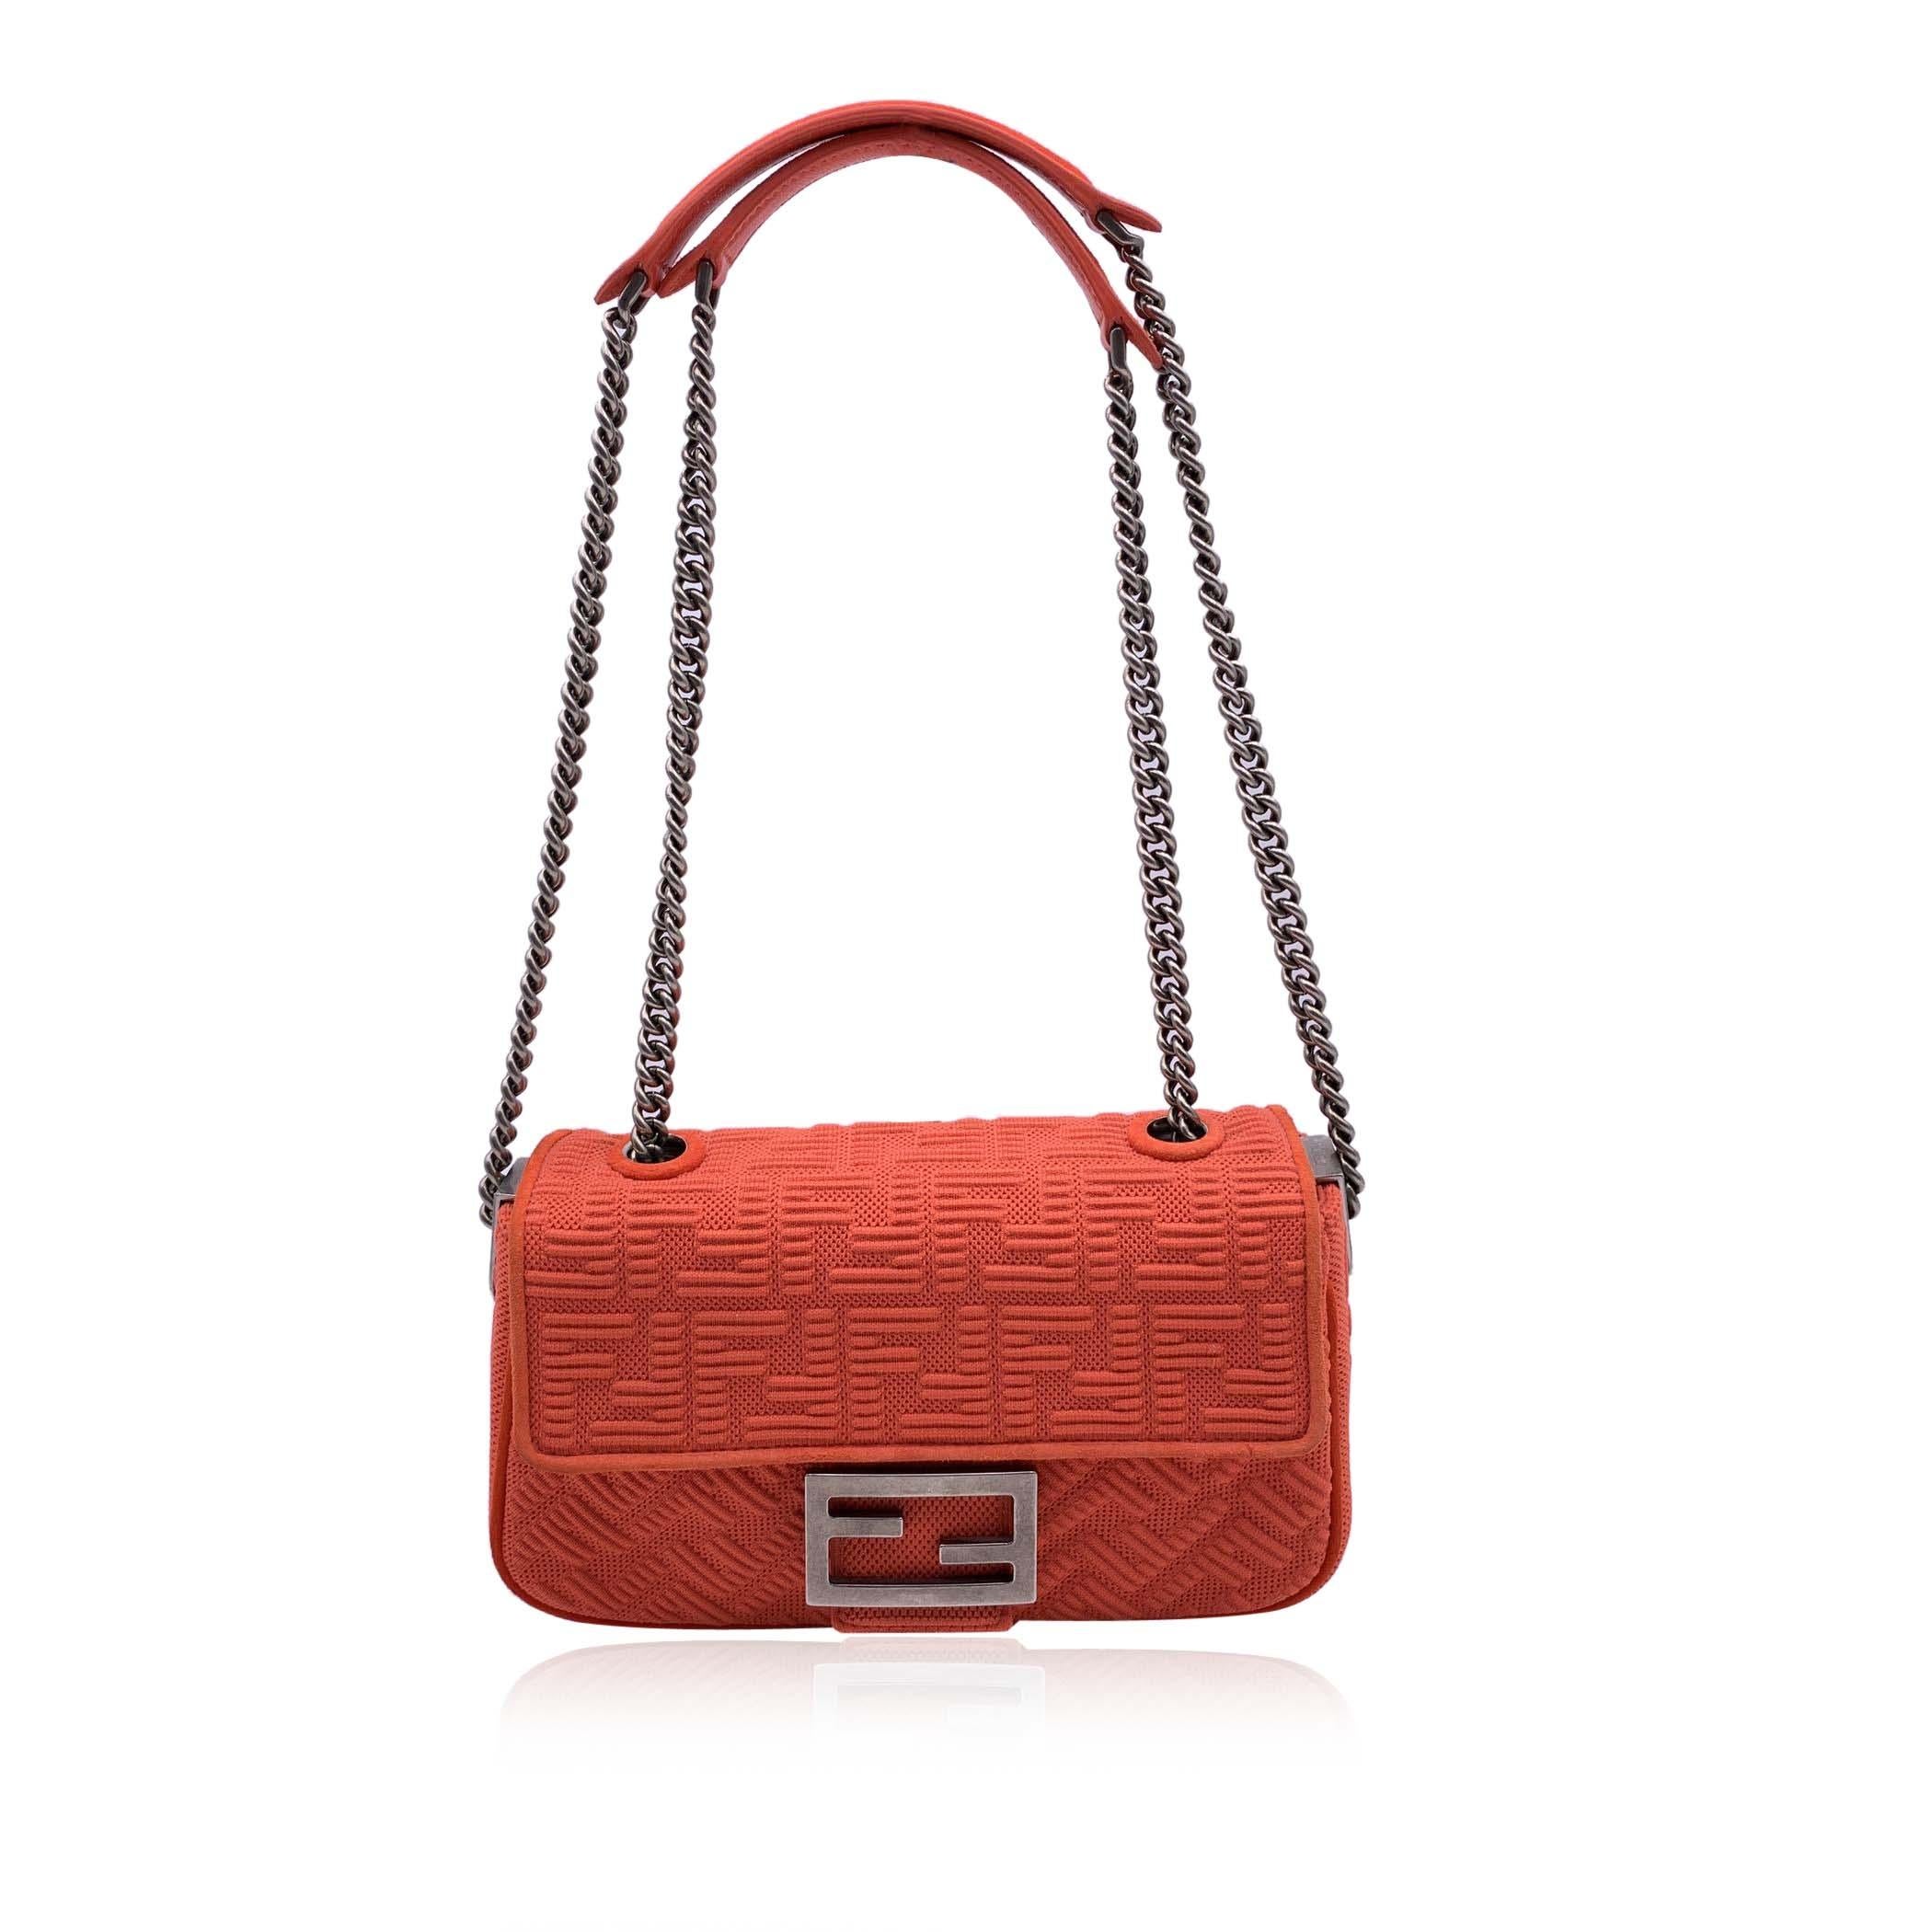 Fendi Orange Embossed FF Logo Baguette Chain Crossbody Bag In Excellent Condition For Sale In Rome, Rome